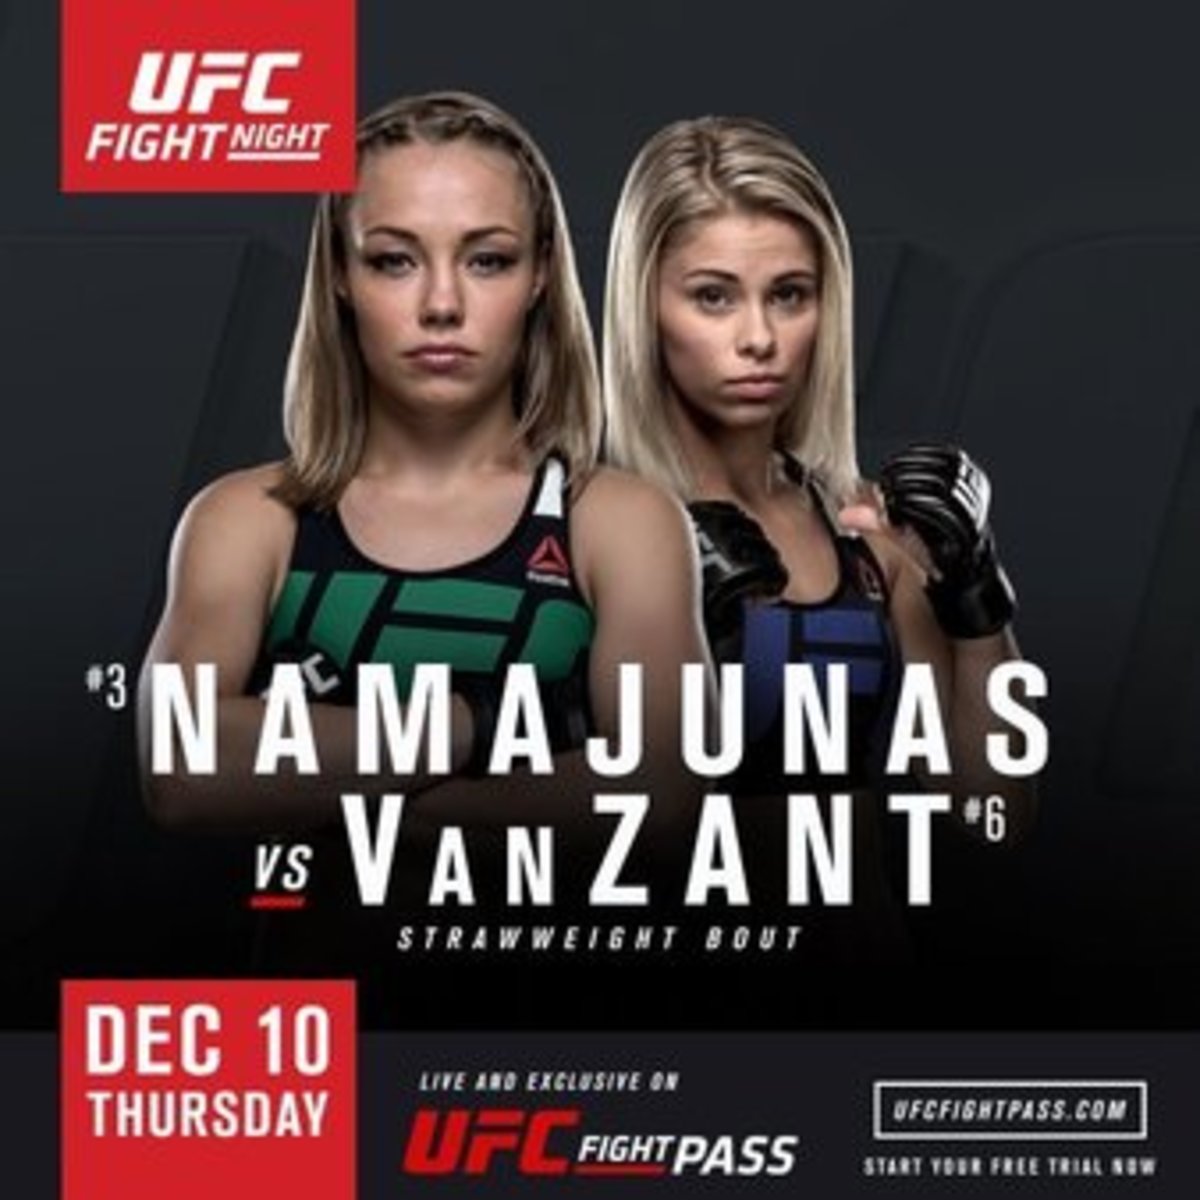 UFC Fight Night 80 takes place on Thursday night from Las Vegas, Nevada.